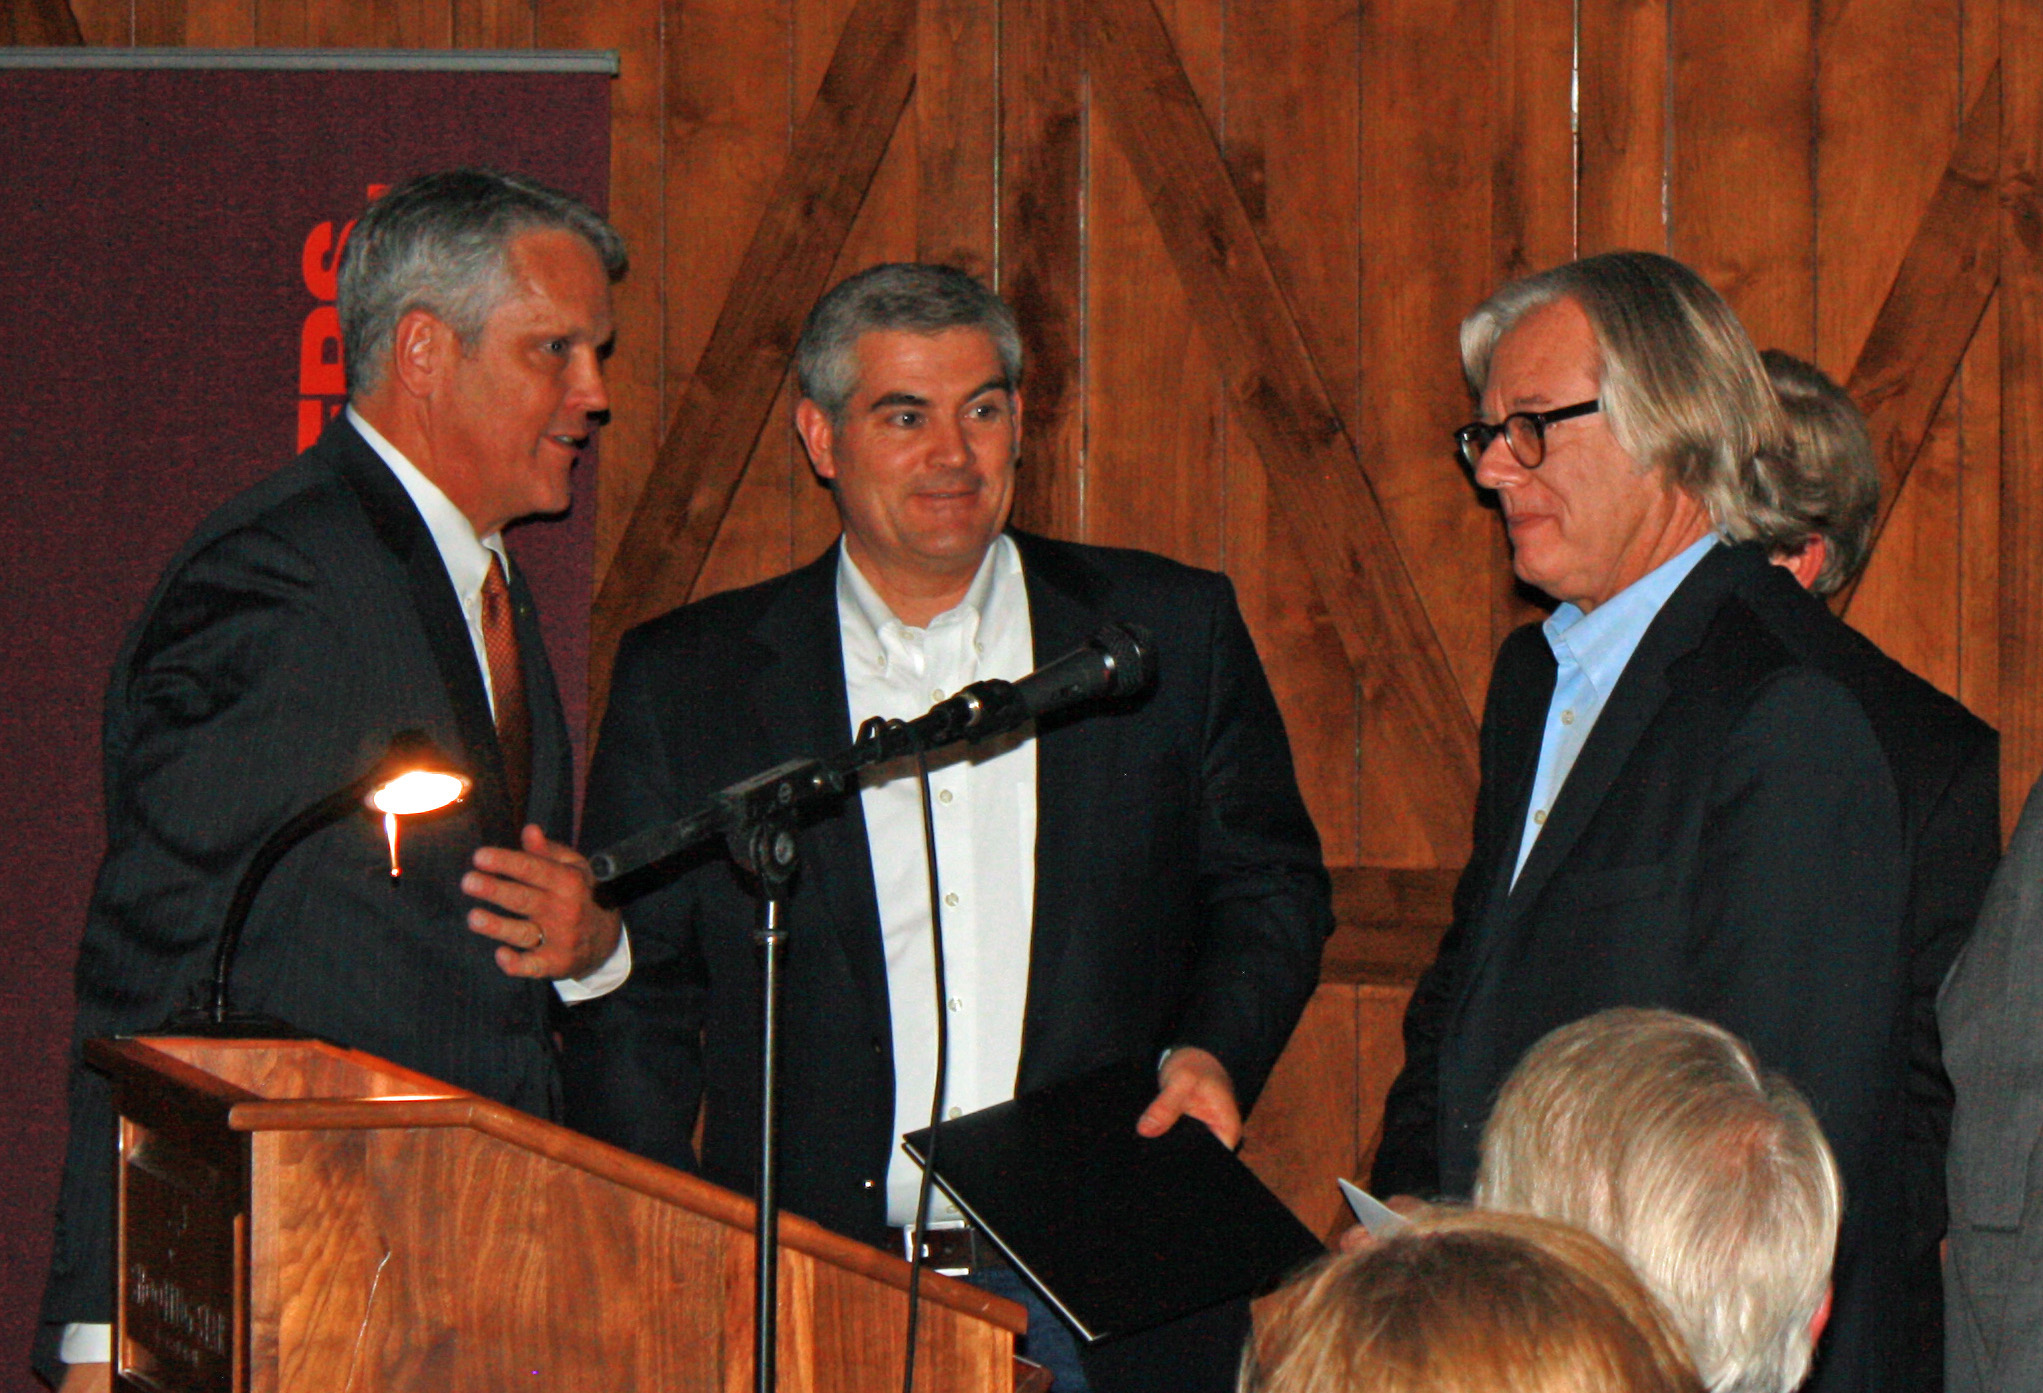 AIA WMR Senior Director Stuart Coppedge presents Mitch Blake and Tom Ward with AIA WMR’s 2013 Firm of the Year award at the Four Seasons in Jackson Hole on Friday. (© Galen Parke)